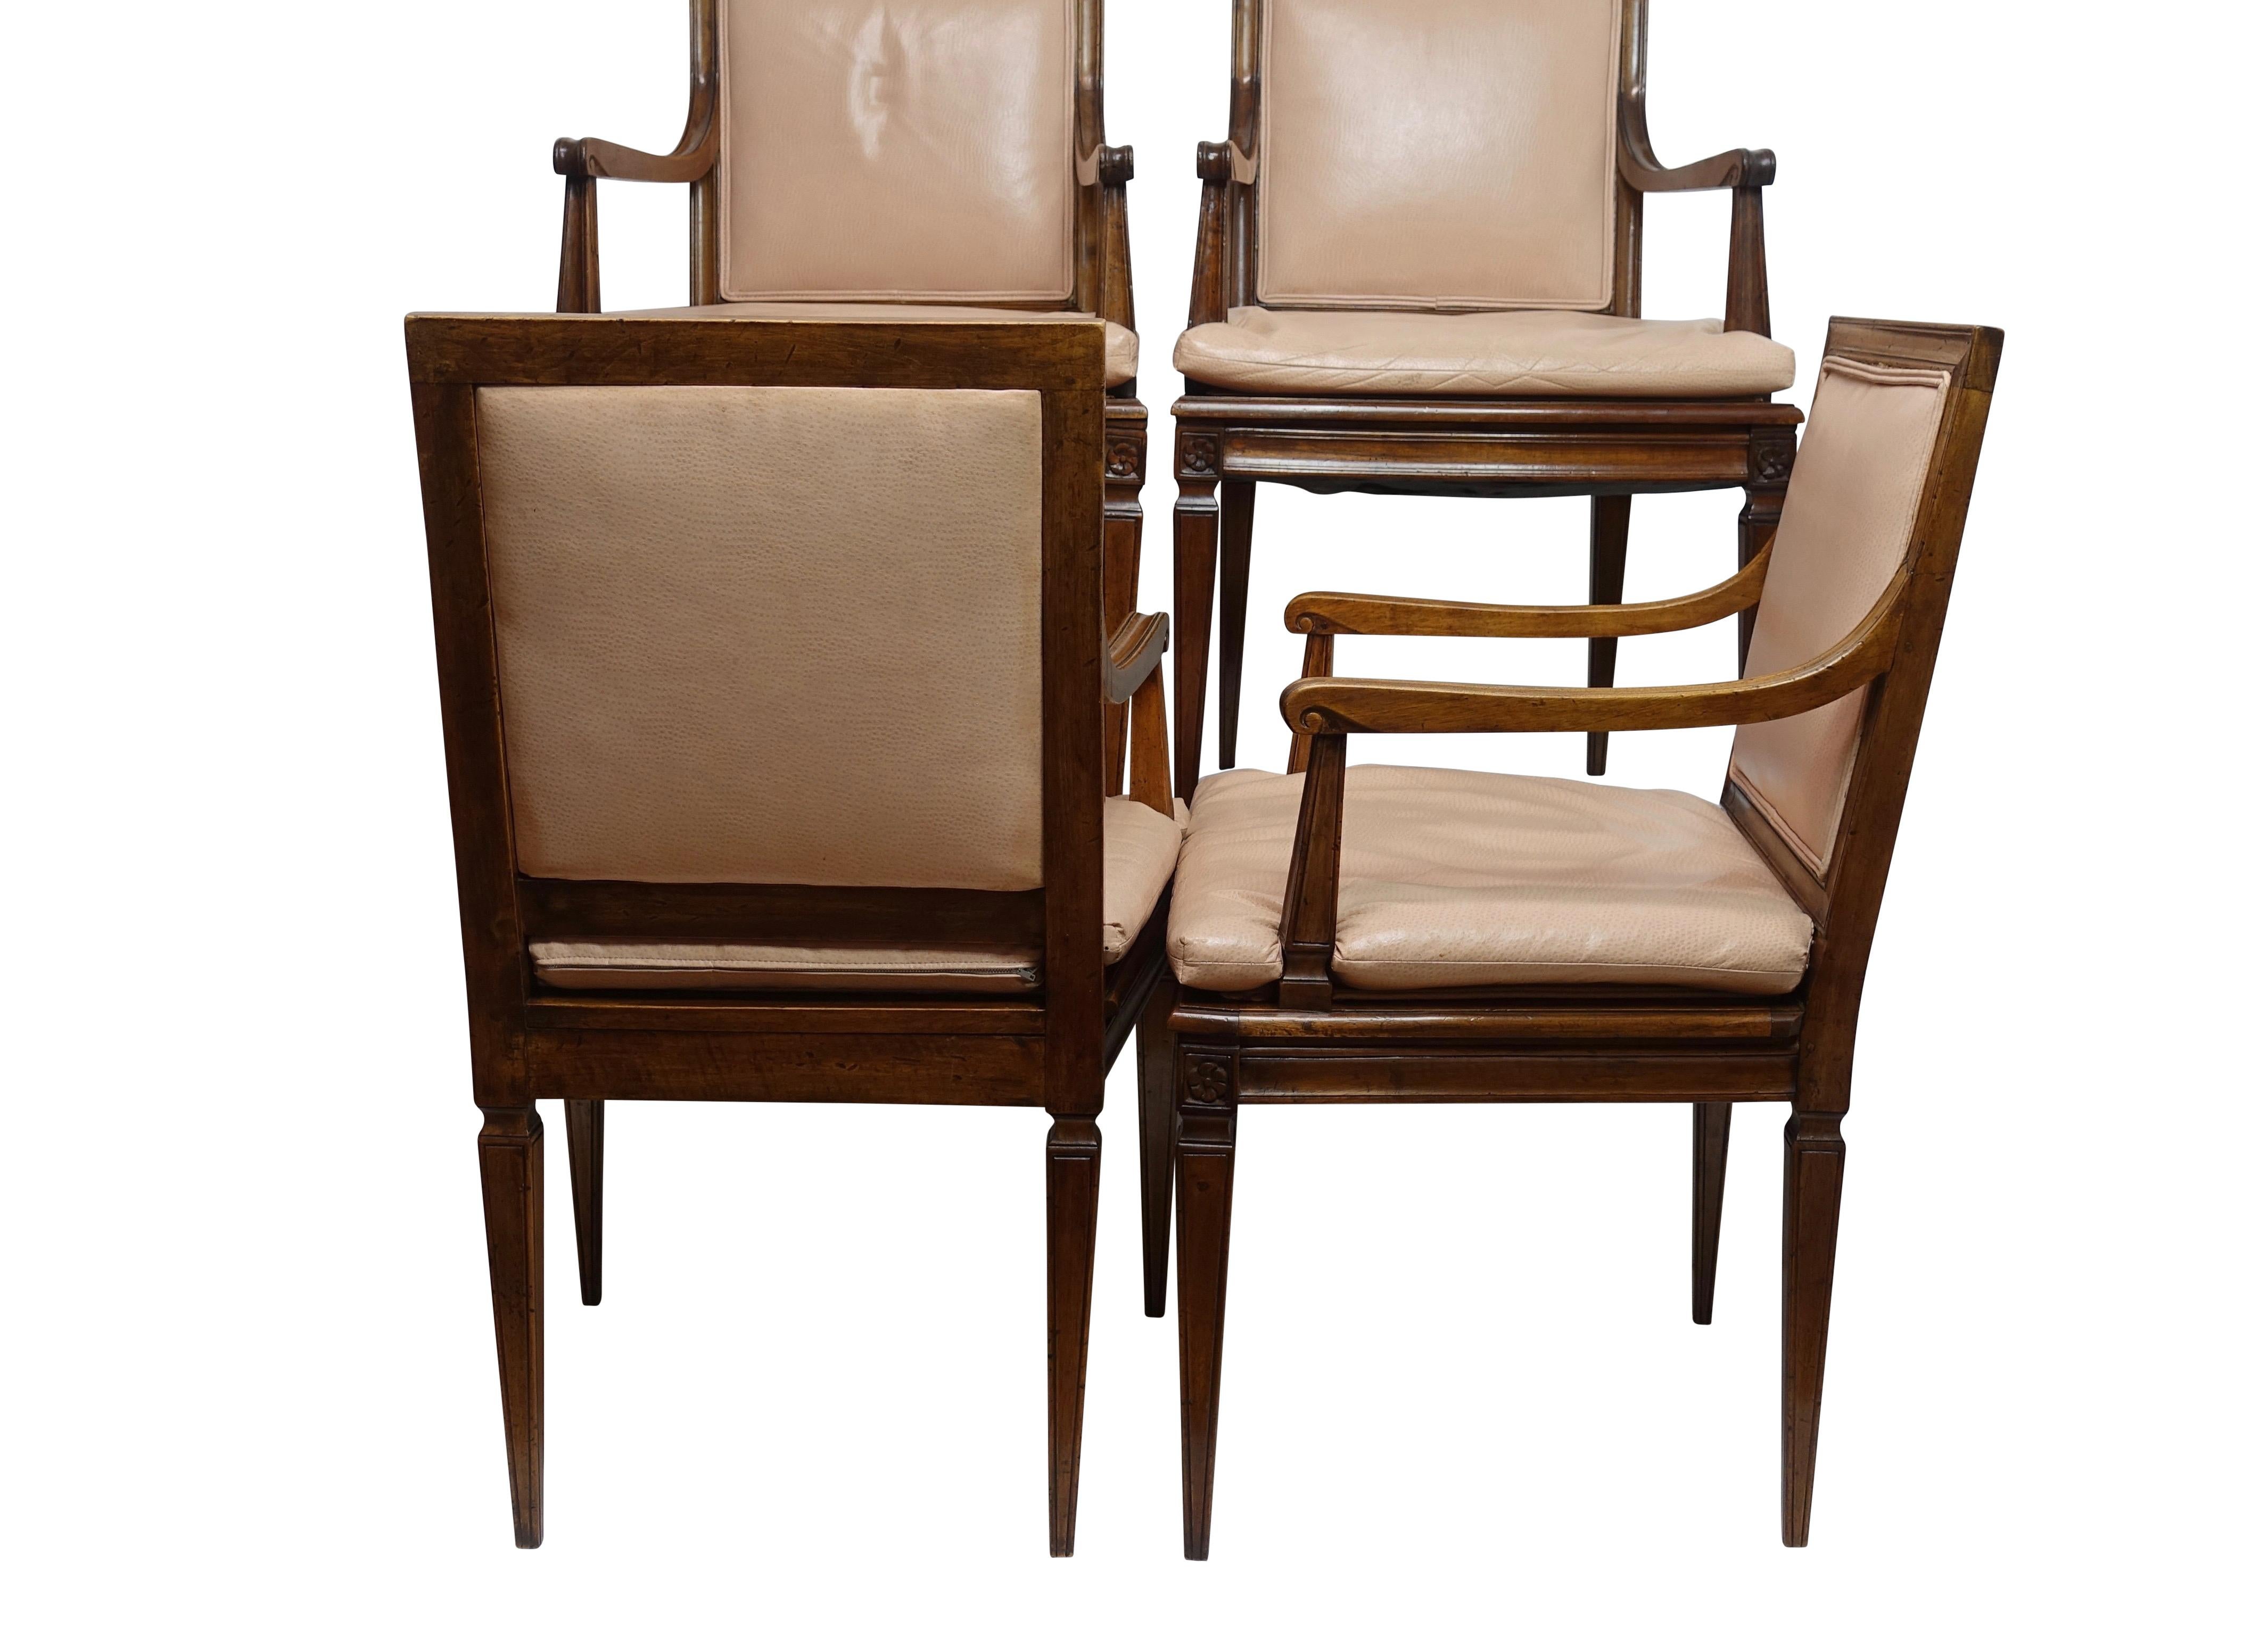 Polished Set of Four Neoclassical Style Armchairs, Italian, Late 19th-Early 20th Century